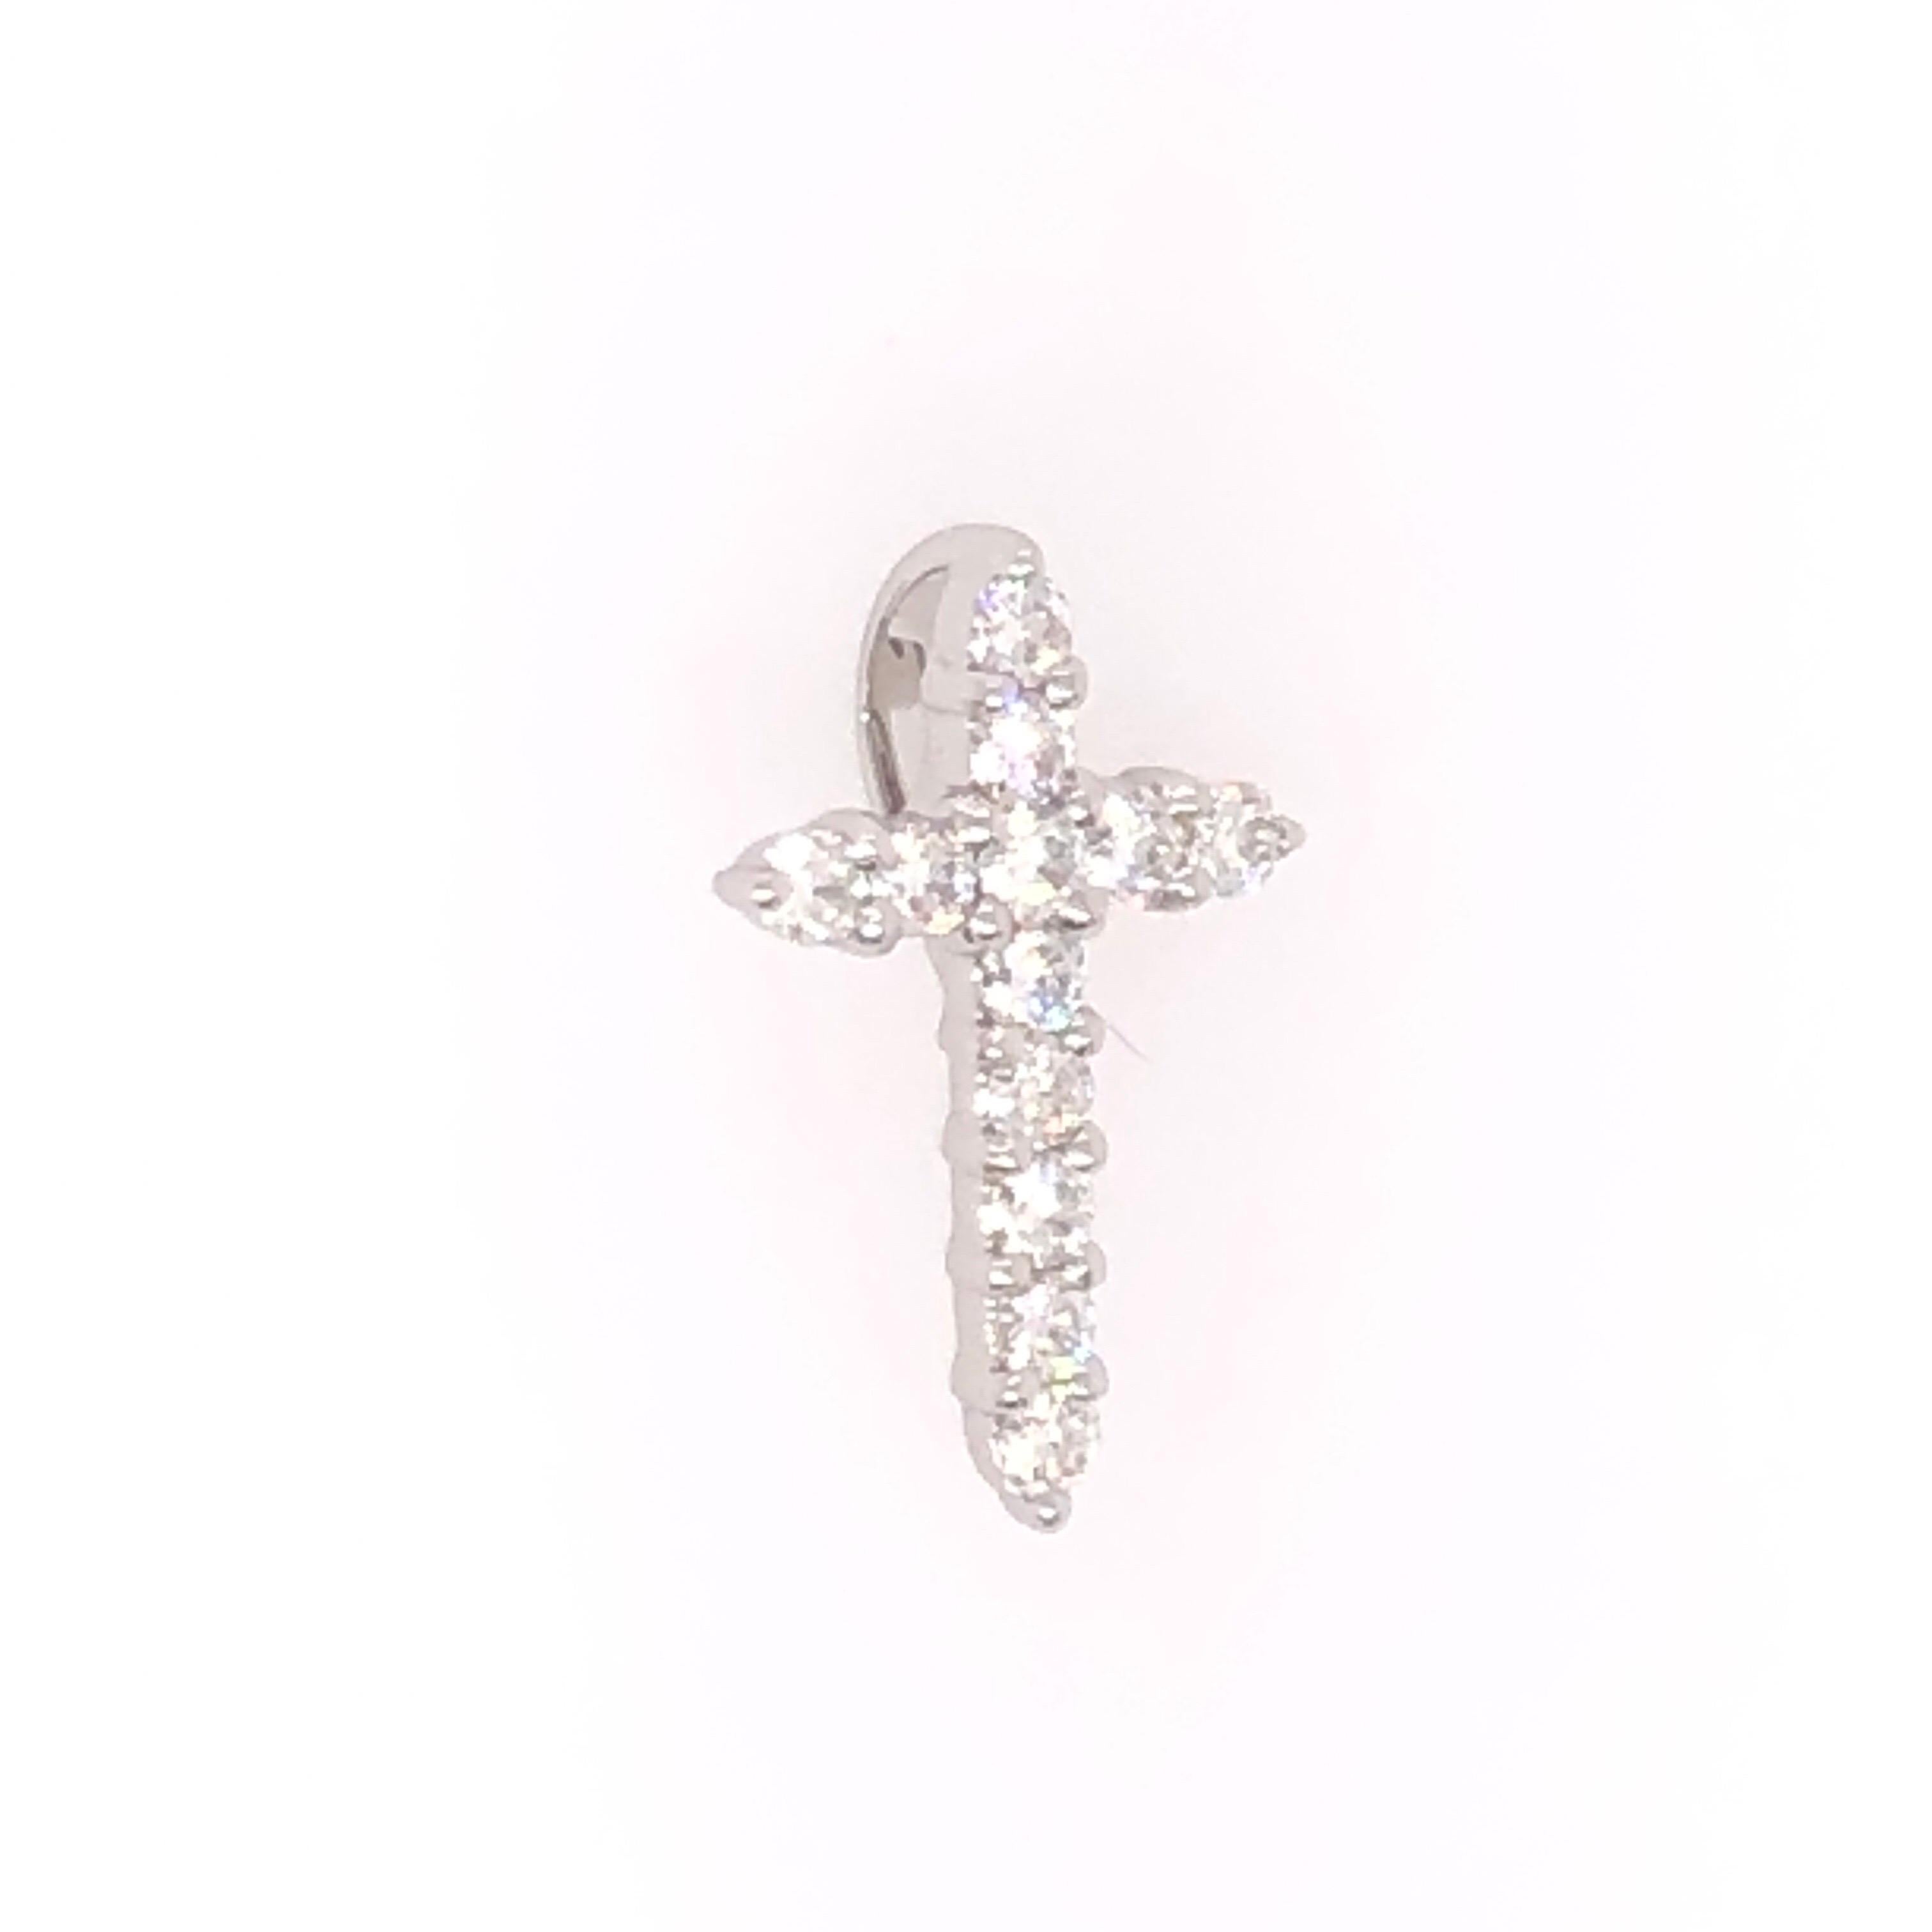 Beautiful petite 18K white gold and diamond cross pendant. A total weight of 0.27 CTS round cut diamonds catch the light for a touch of sparkle. 

This is a perfect gift for first communion or confirmation!